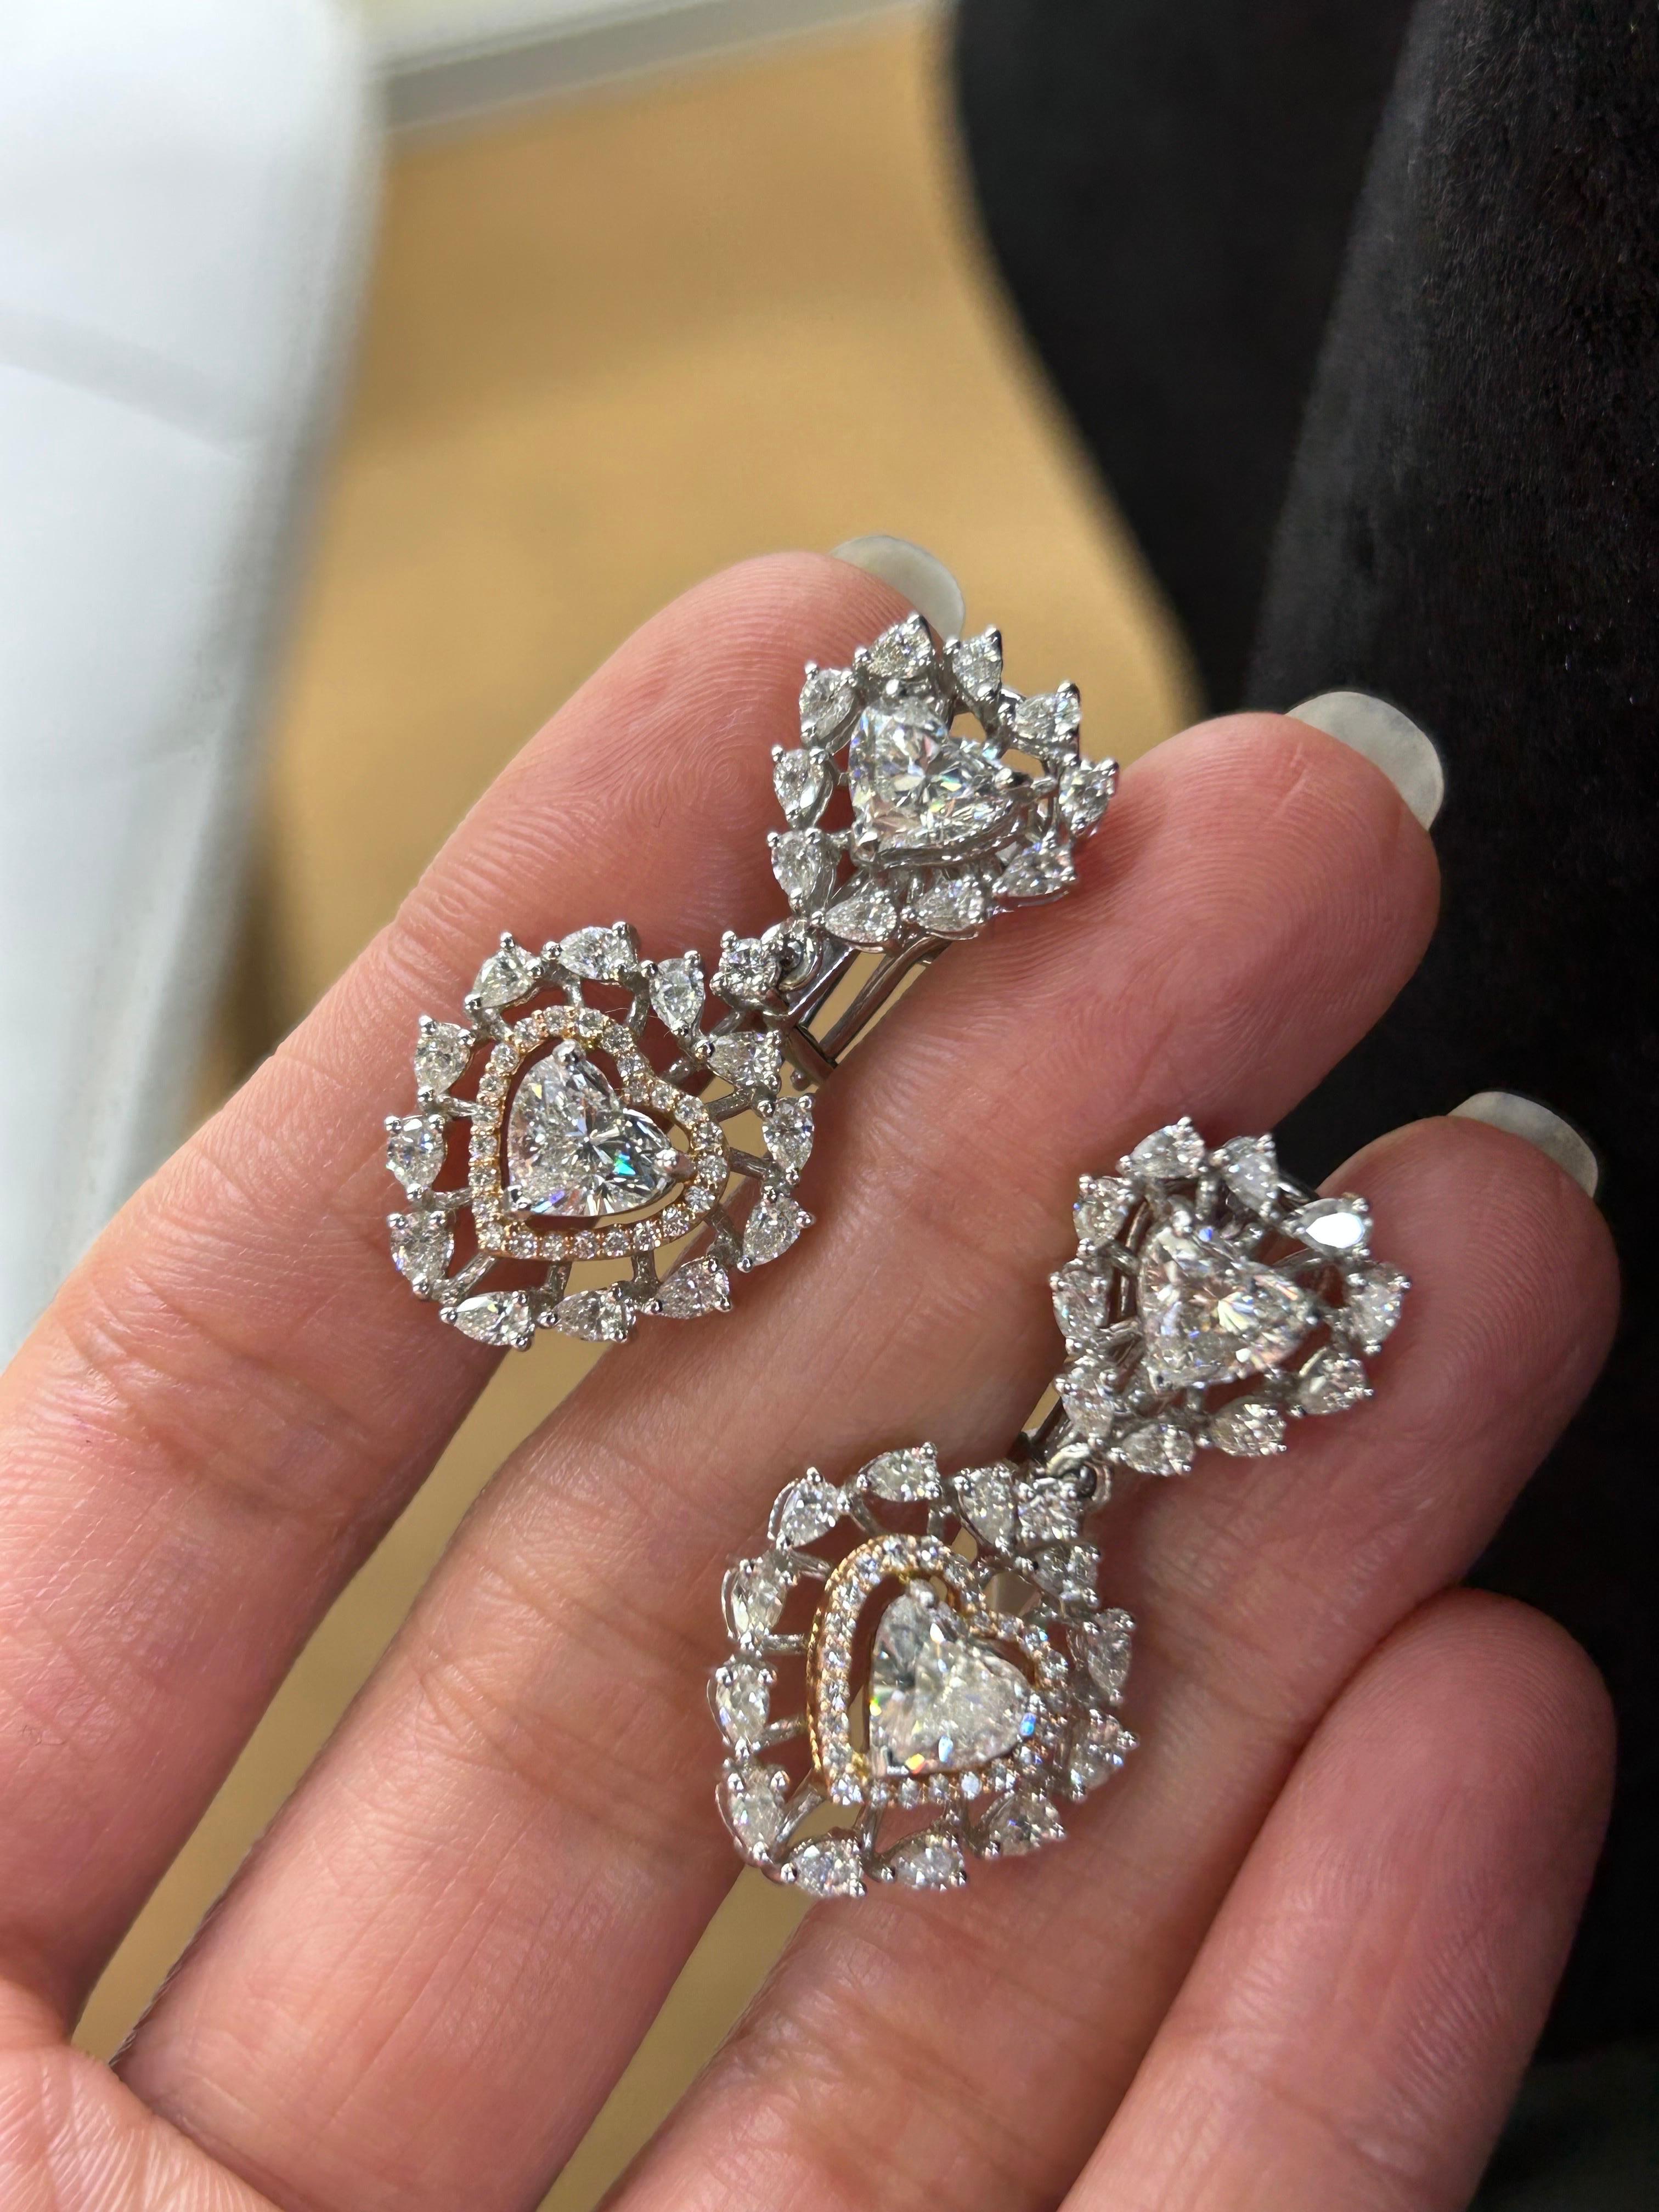 A beautiful 3.6 carat Heart Shape Diamond dangle earrings, G.H color SI quality, with around 1.5 carat pear and round shape diamonds surrounding it. All set in solid 18K White Gold. 